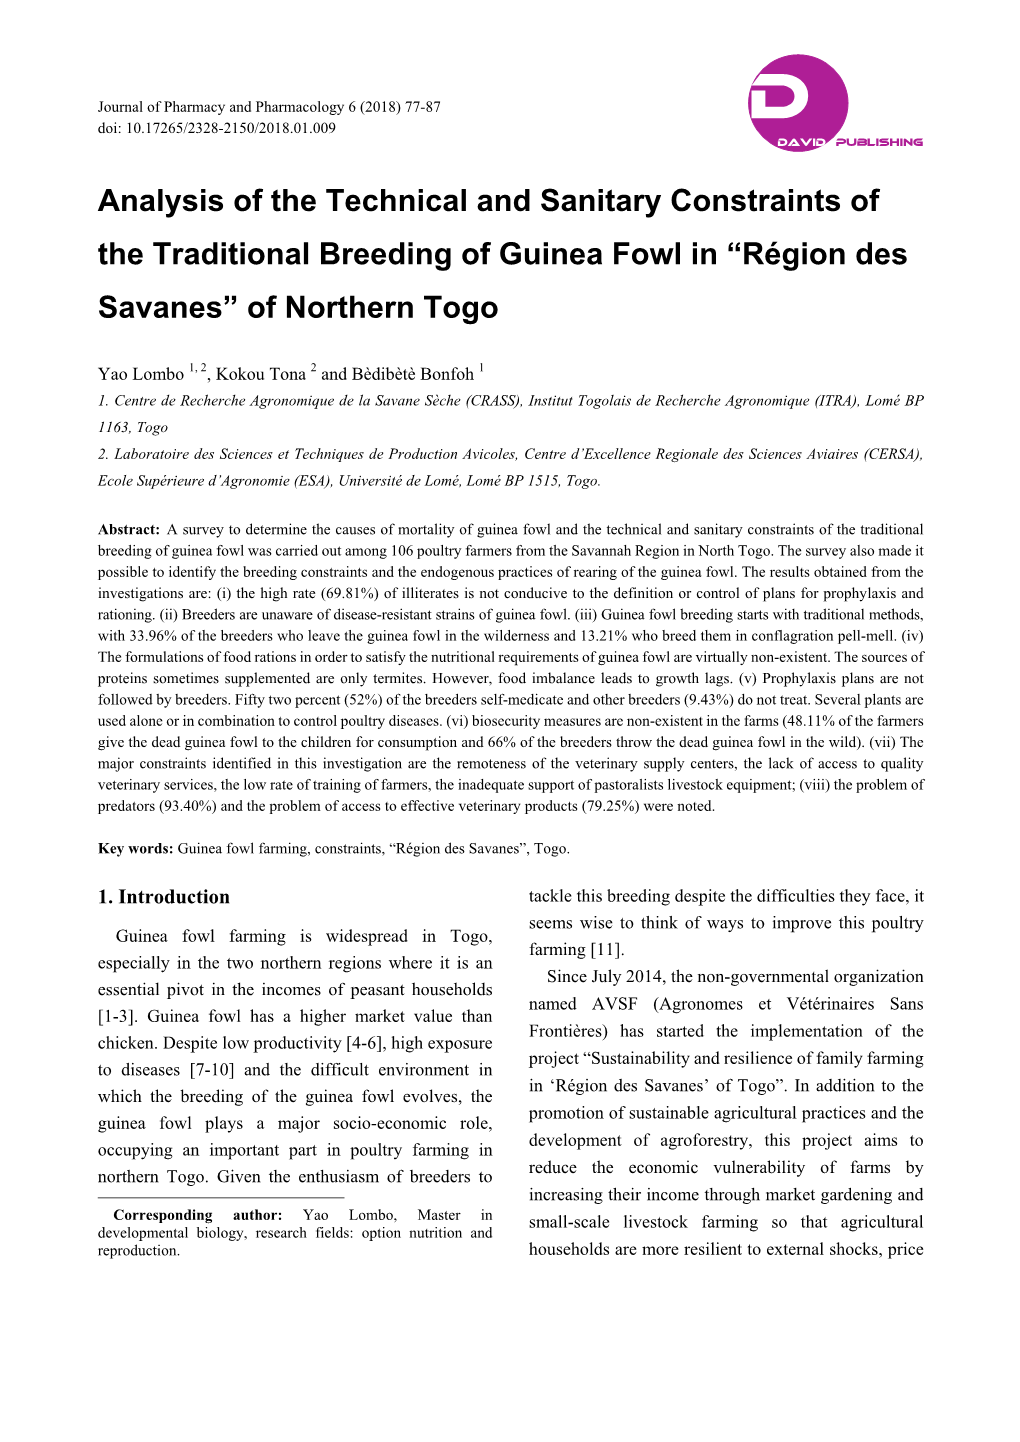 Analysis of the Technical and Sanitary Constraints of the Traditional Breeding of Guinea Fowl in “Région Des Savanes” of Northern Togo